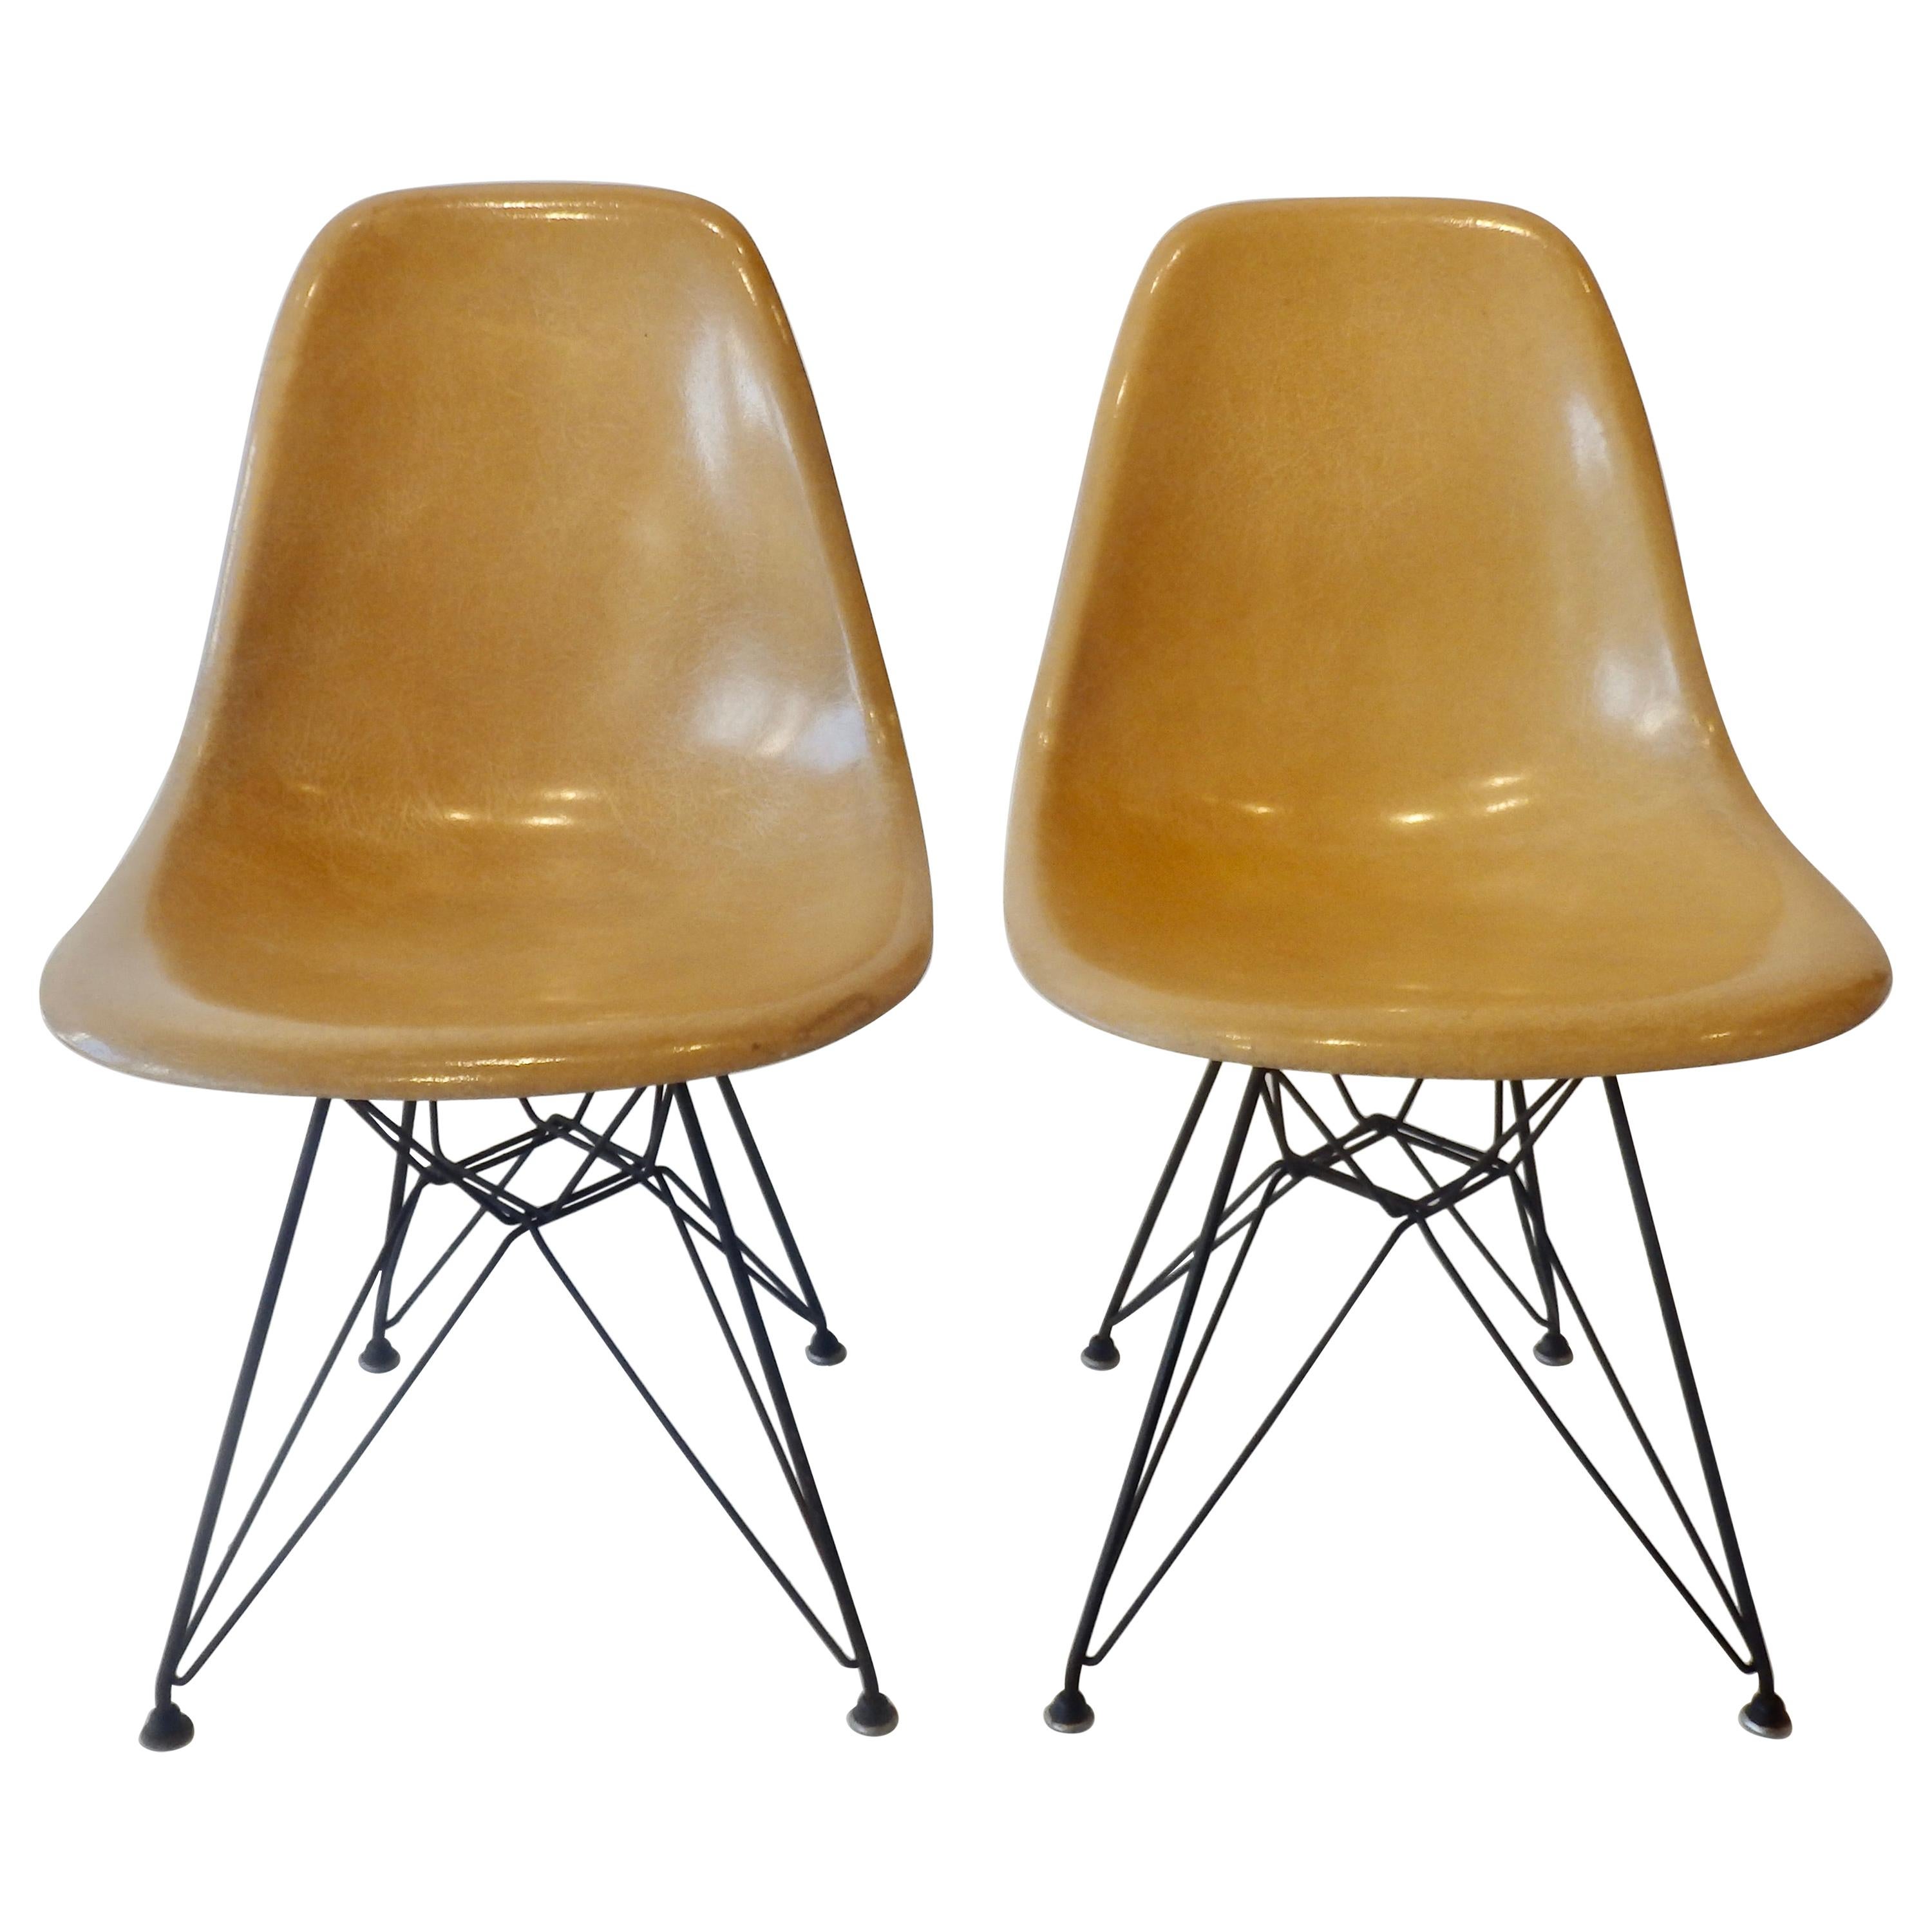 Pair of Eames Fiberglass DSR Chairs on Eiffel Tower Bases